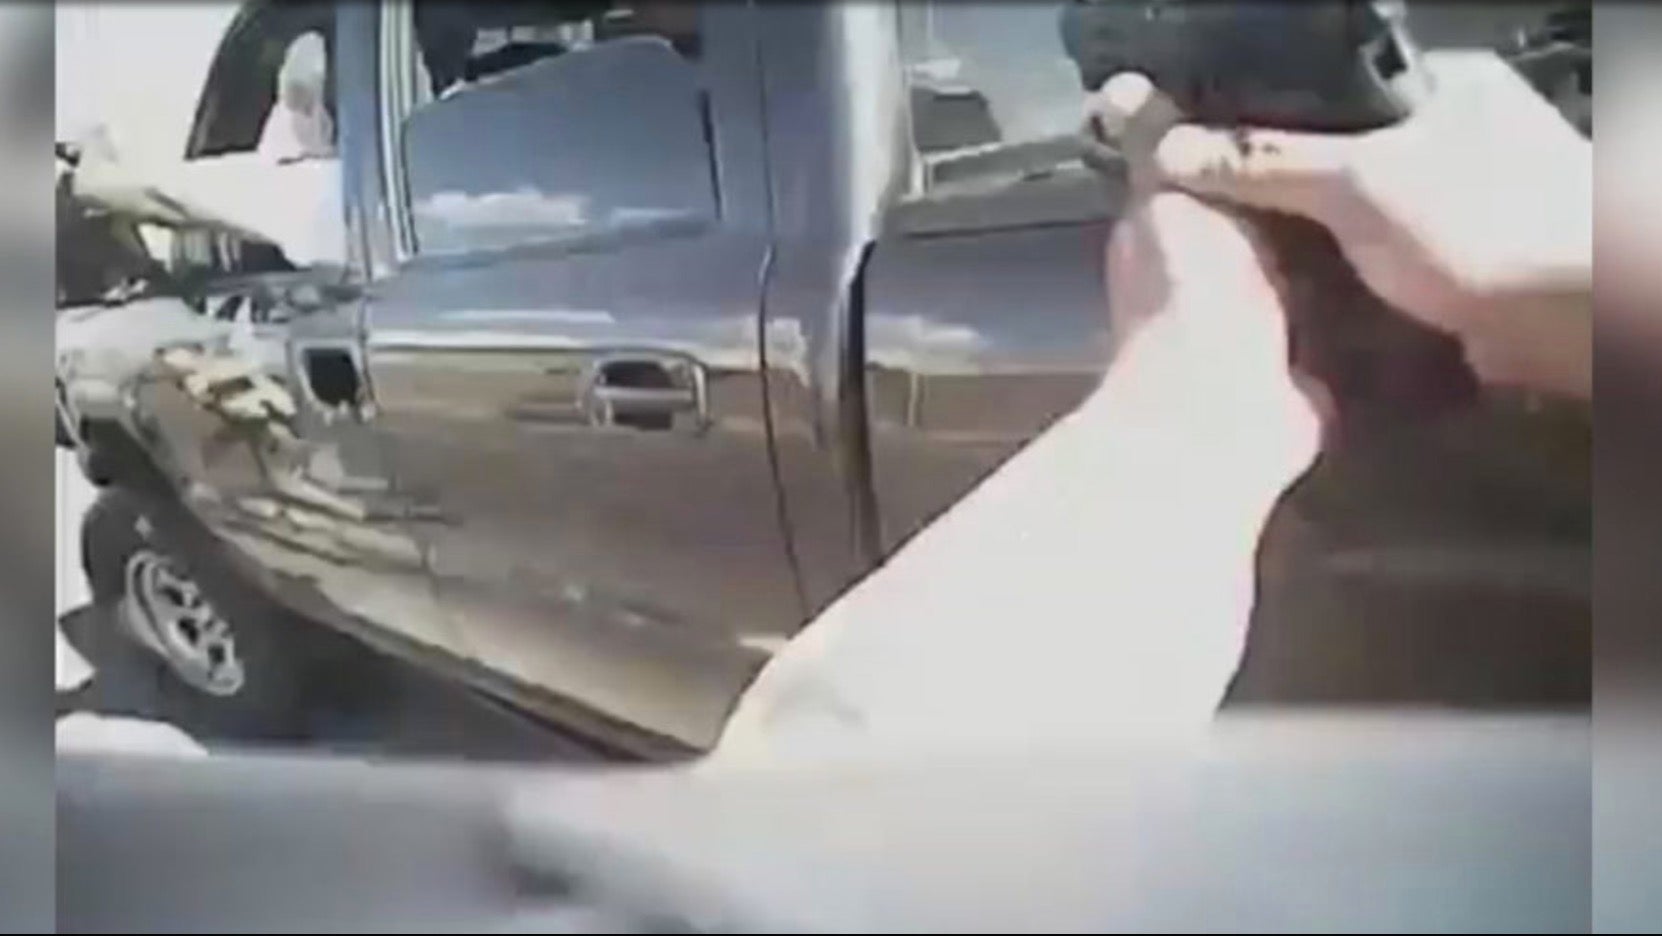 Dramatic Body Cam Footage Shows Exactly Why Police Officers Need You To Follow Their Commands 0400